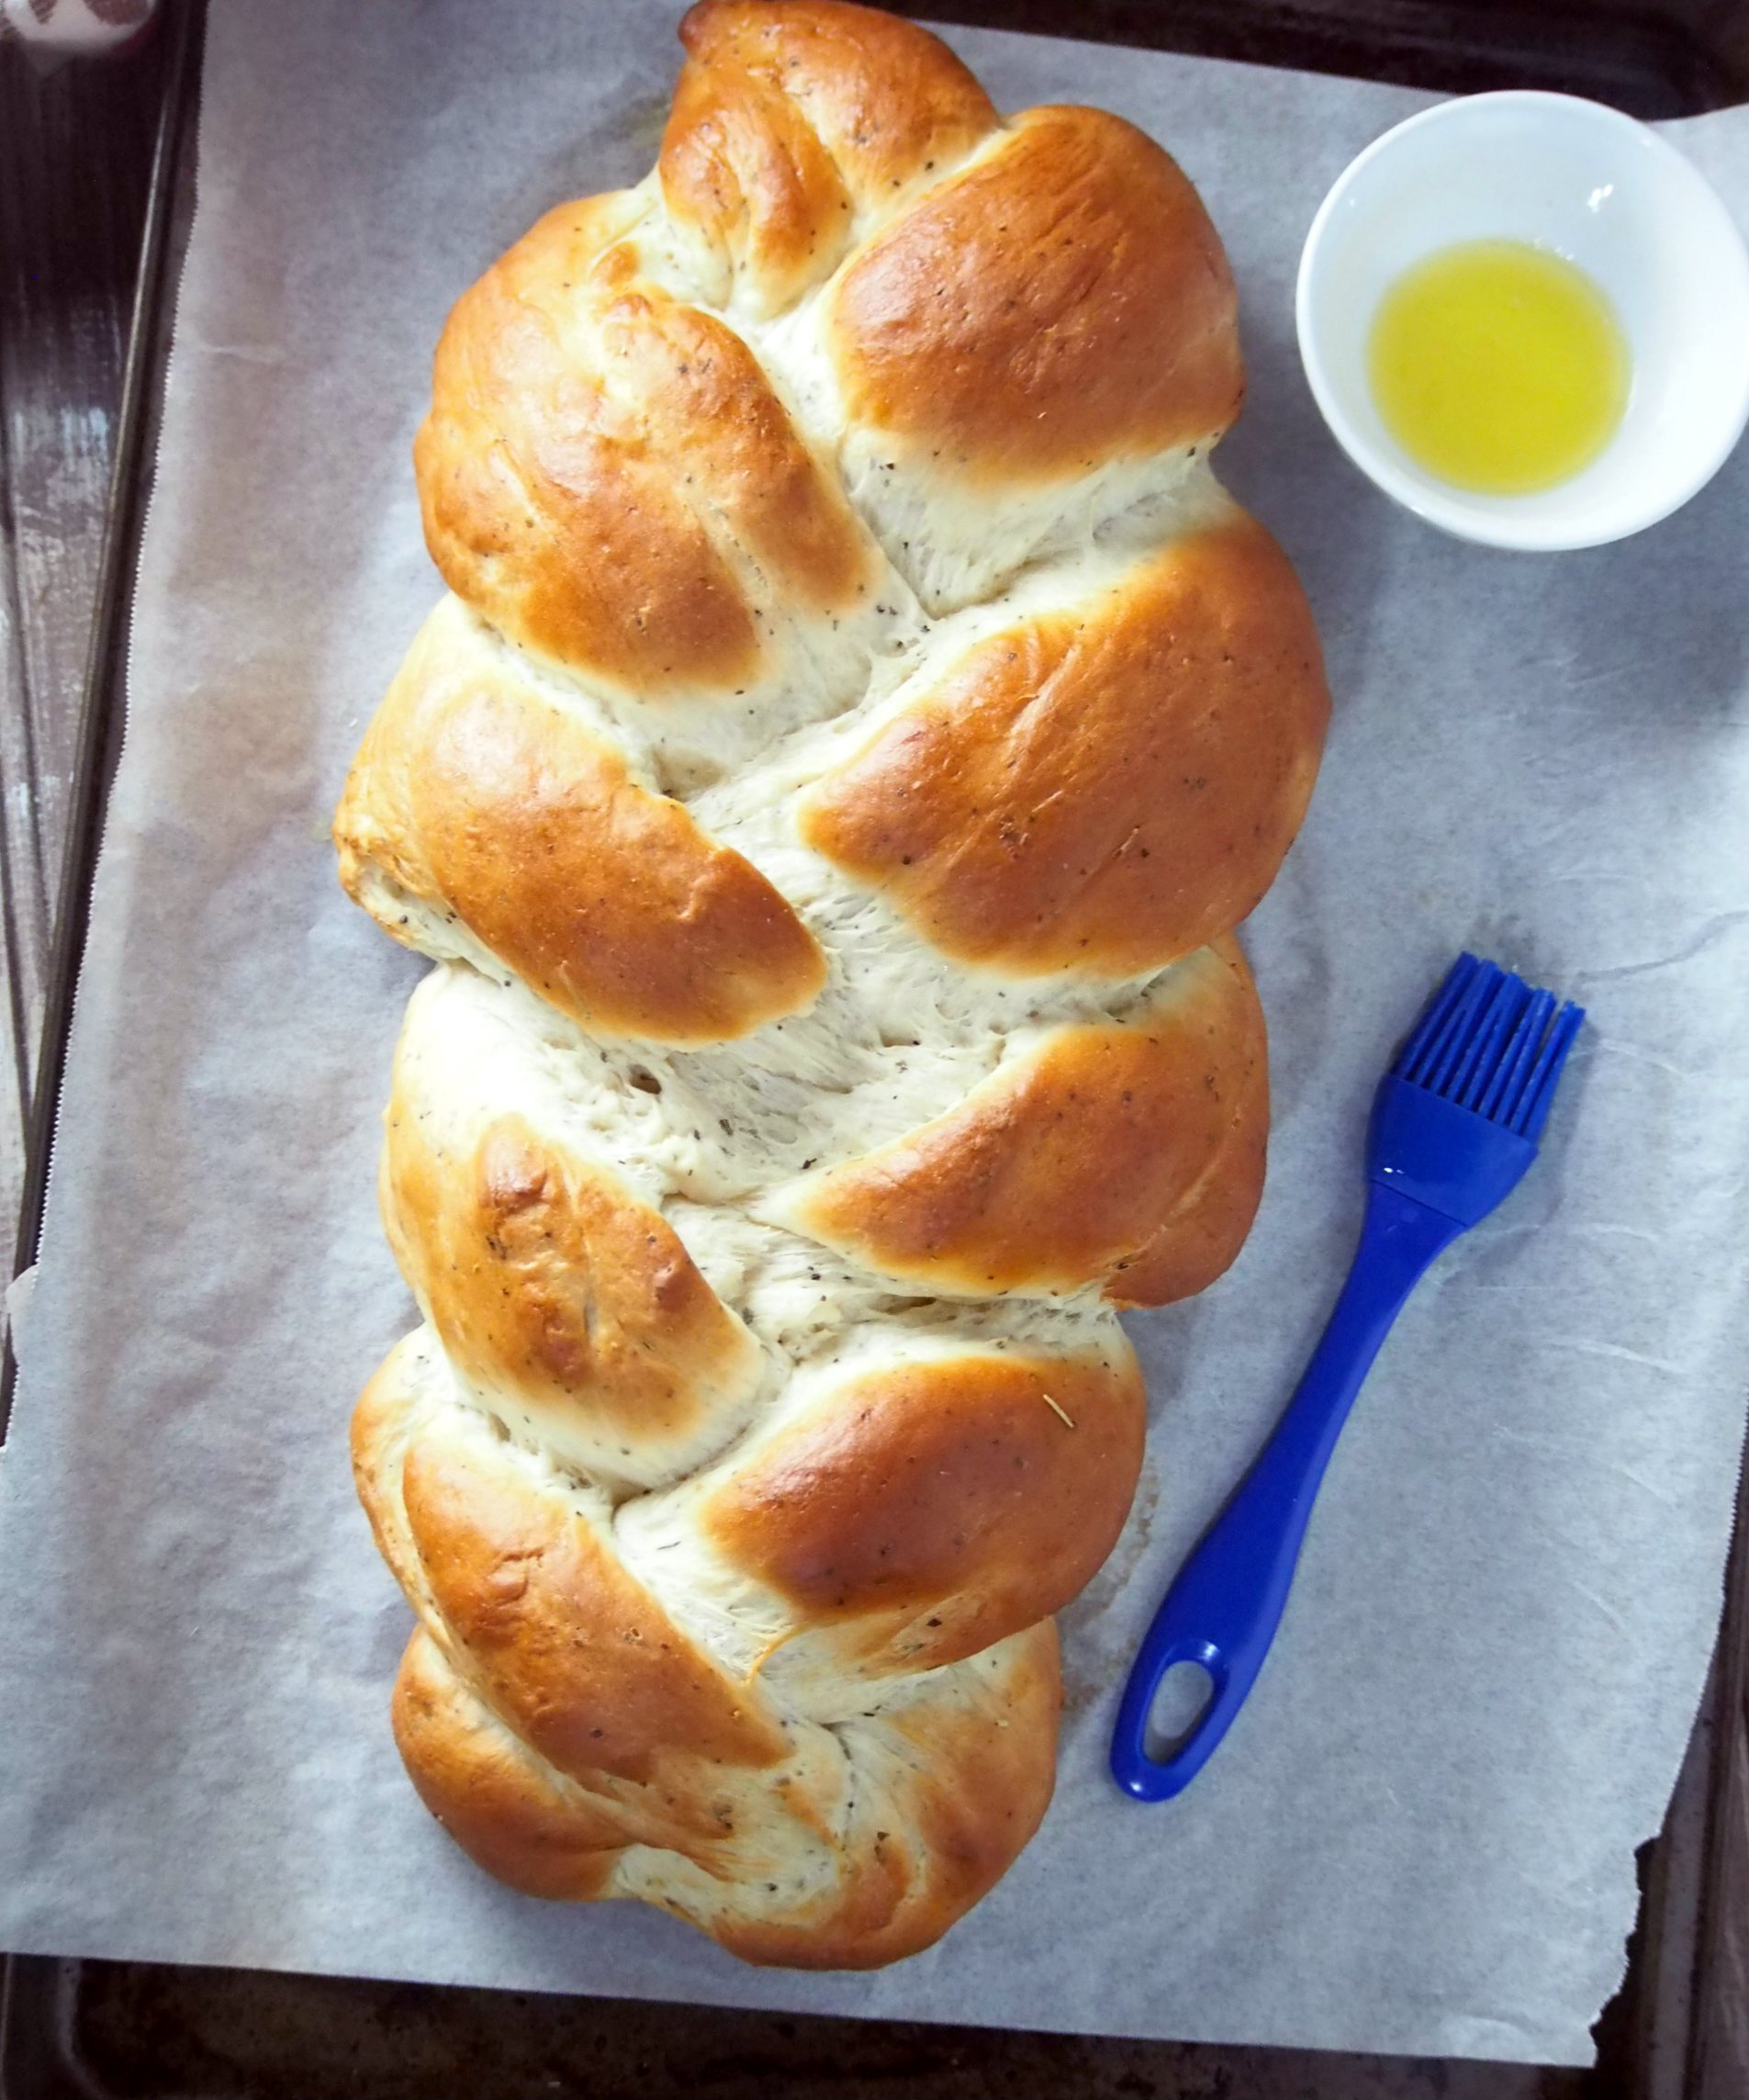 You will love this tasty garlic herb bread that is full of garlic flavor and infused with tasty herbs. This bread is perfect as a side or alone as a filling snack.